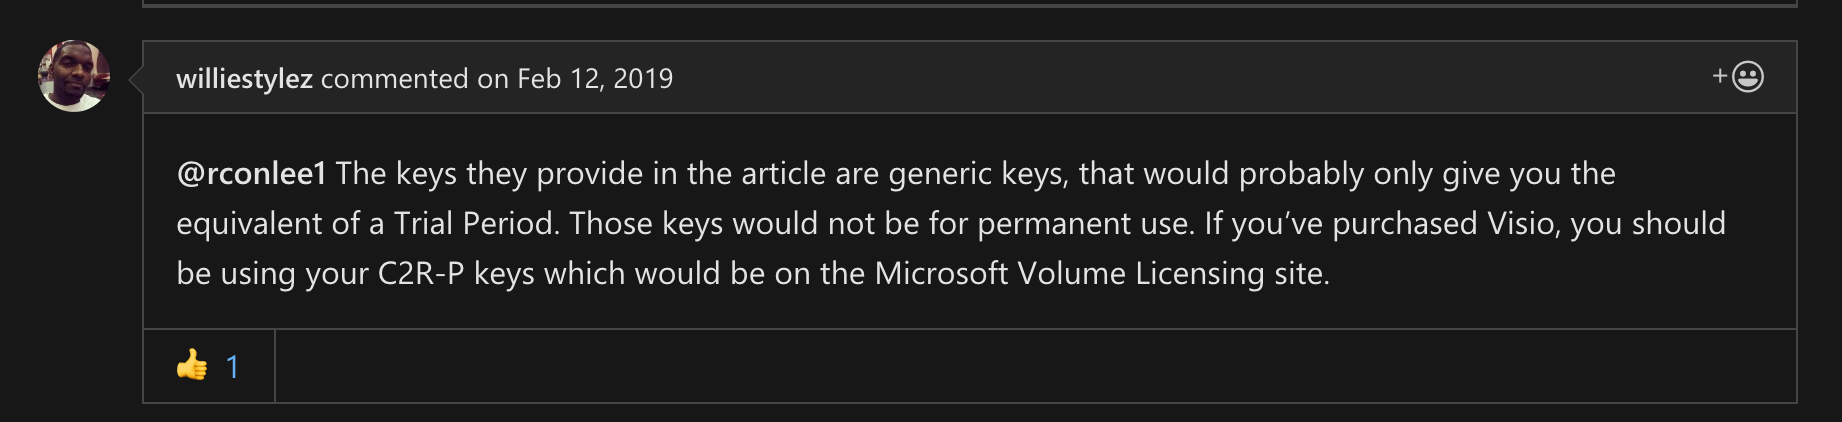 Office365 Comment